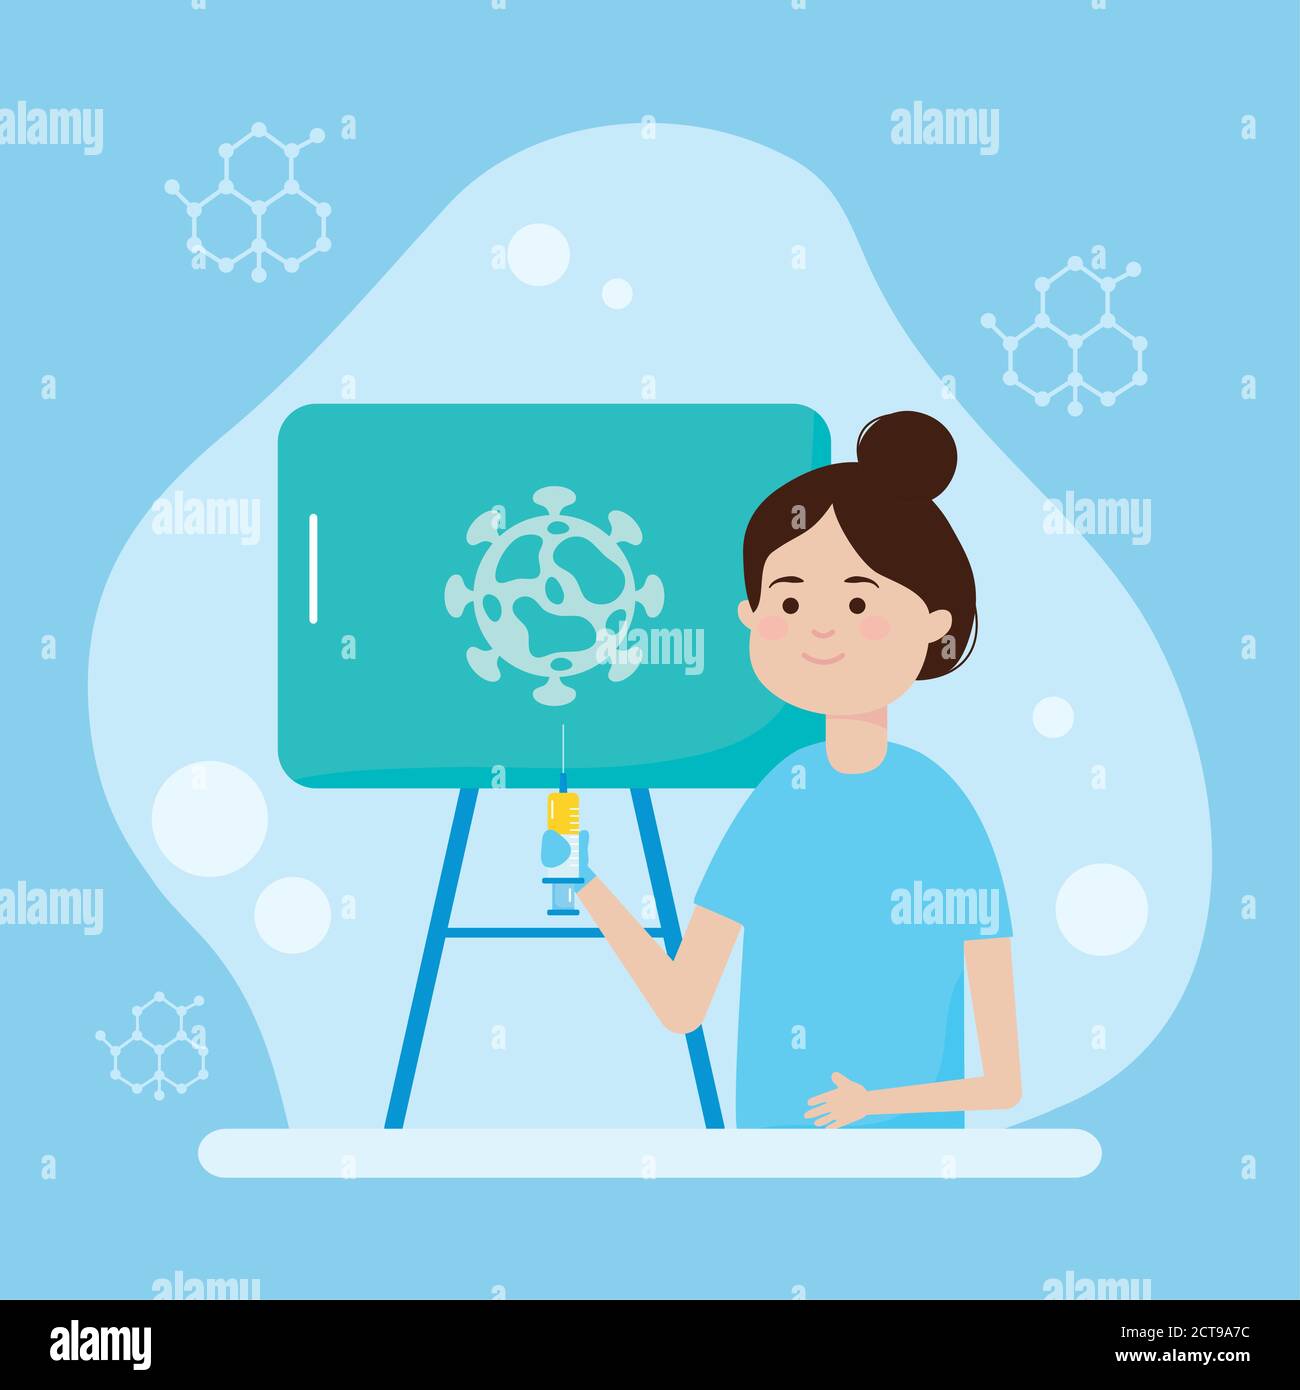 Vaccine research design, Cartoon woman holding a syringe and presentation board with virus icon over blue background, colorful design, vecotr illustration Stock Vector